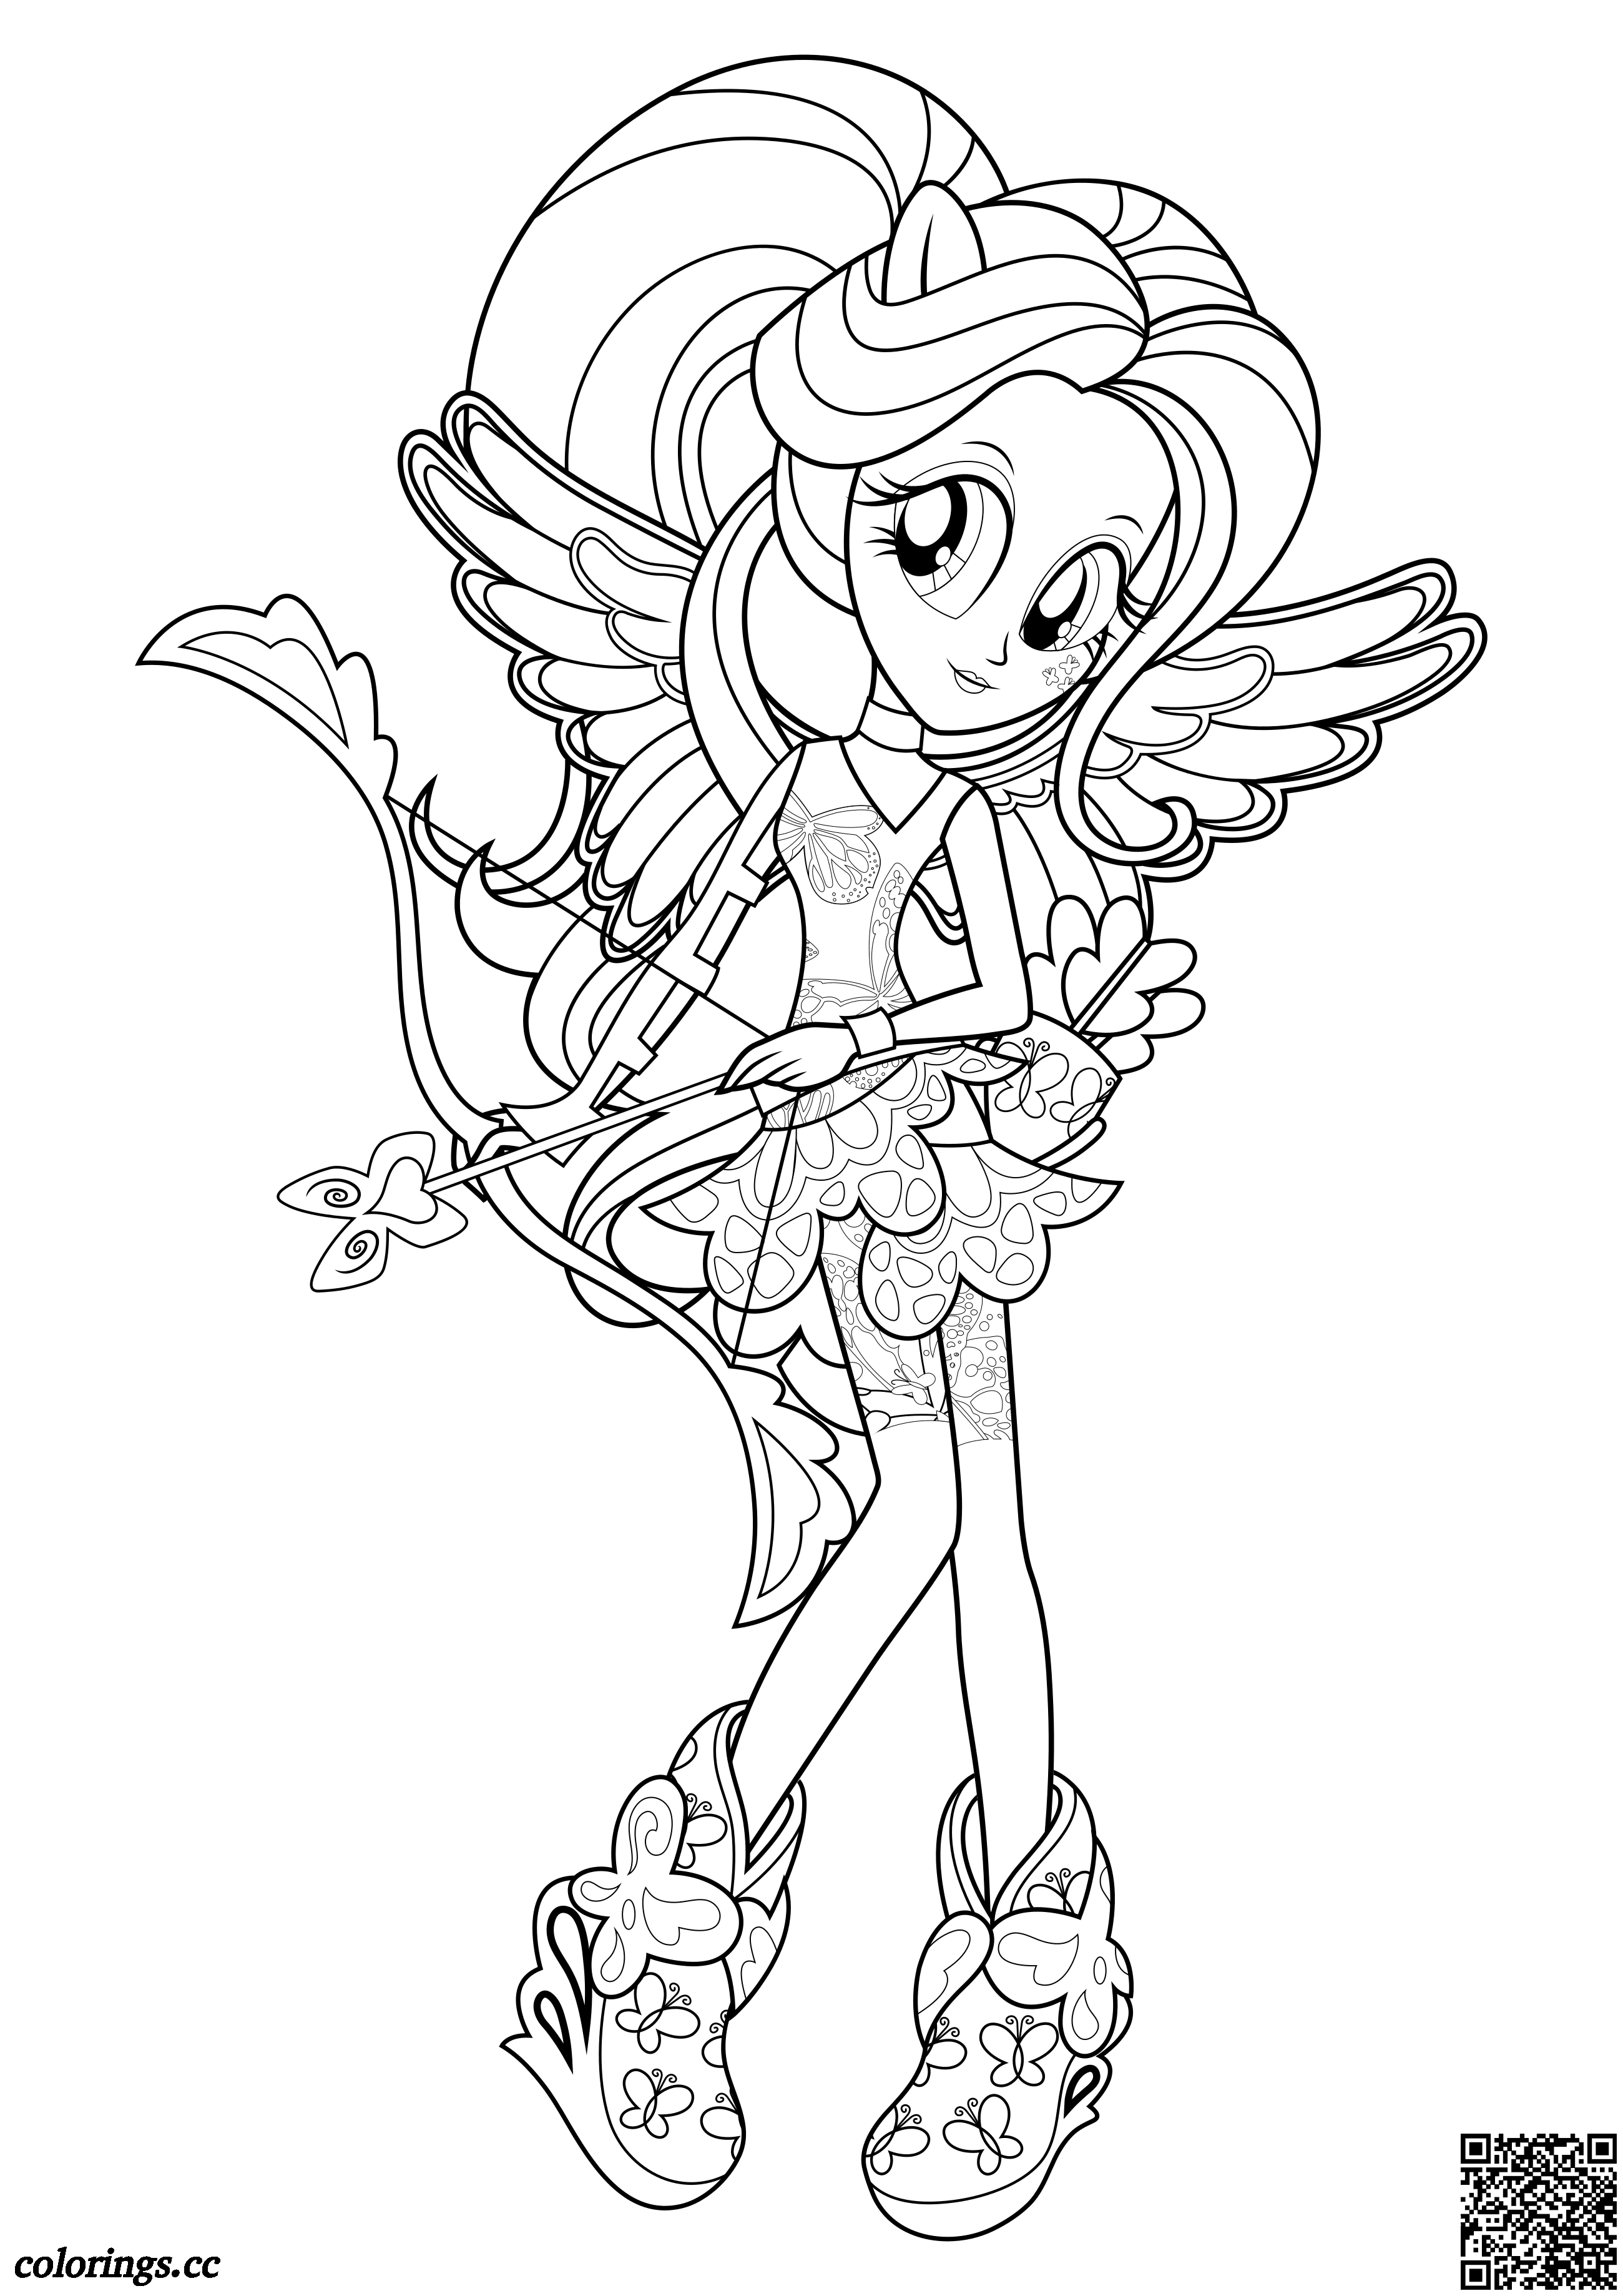 Fluttershy Archery coloring pages, My Little Pony Equestria Girls ...